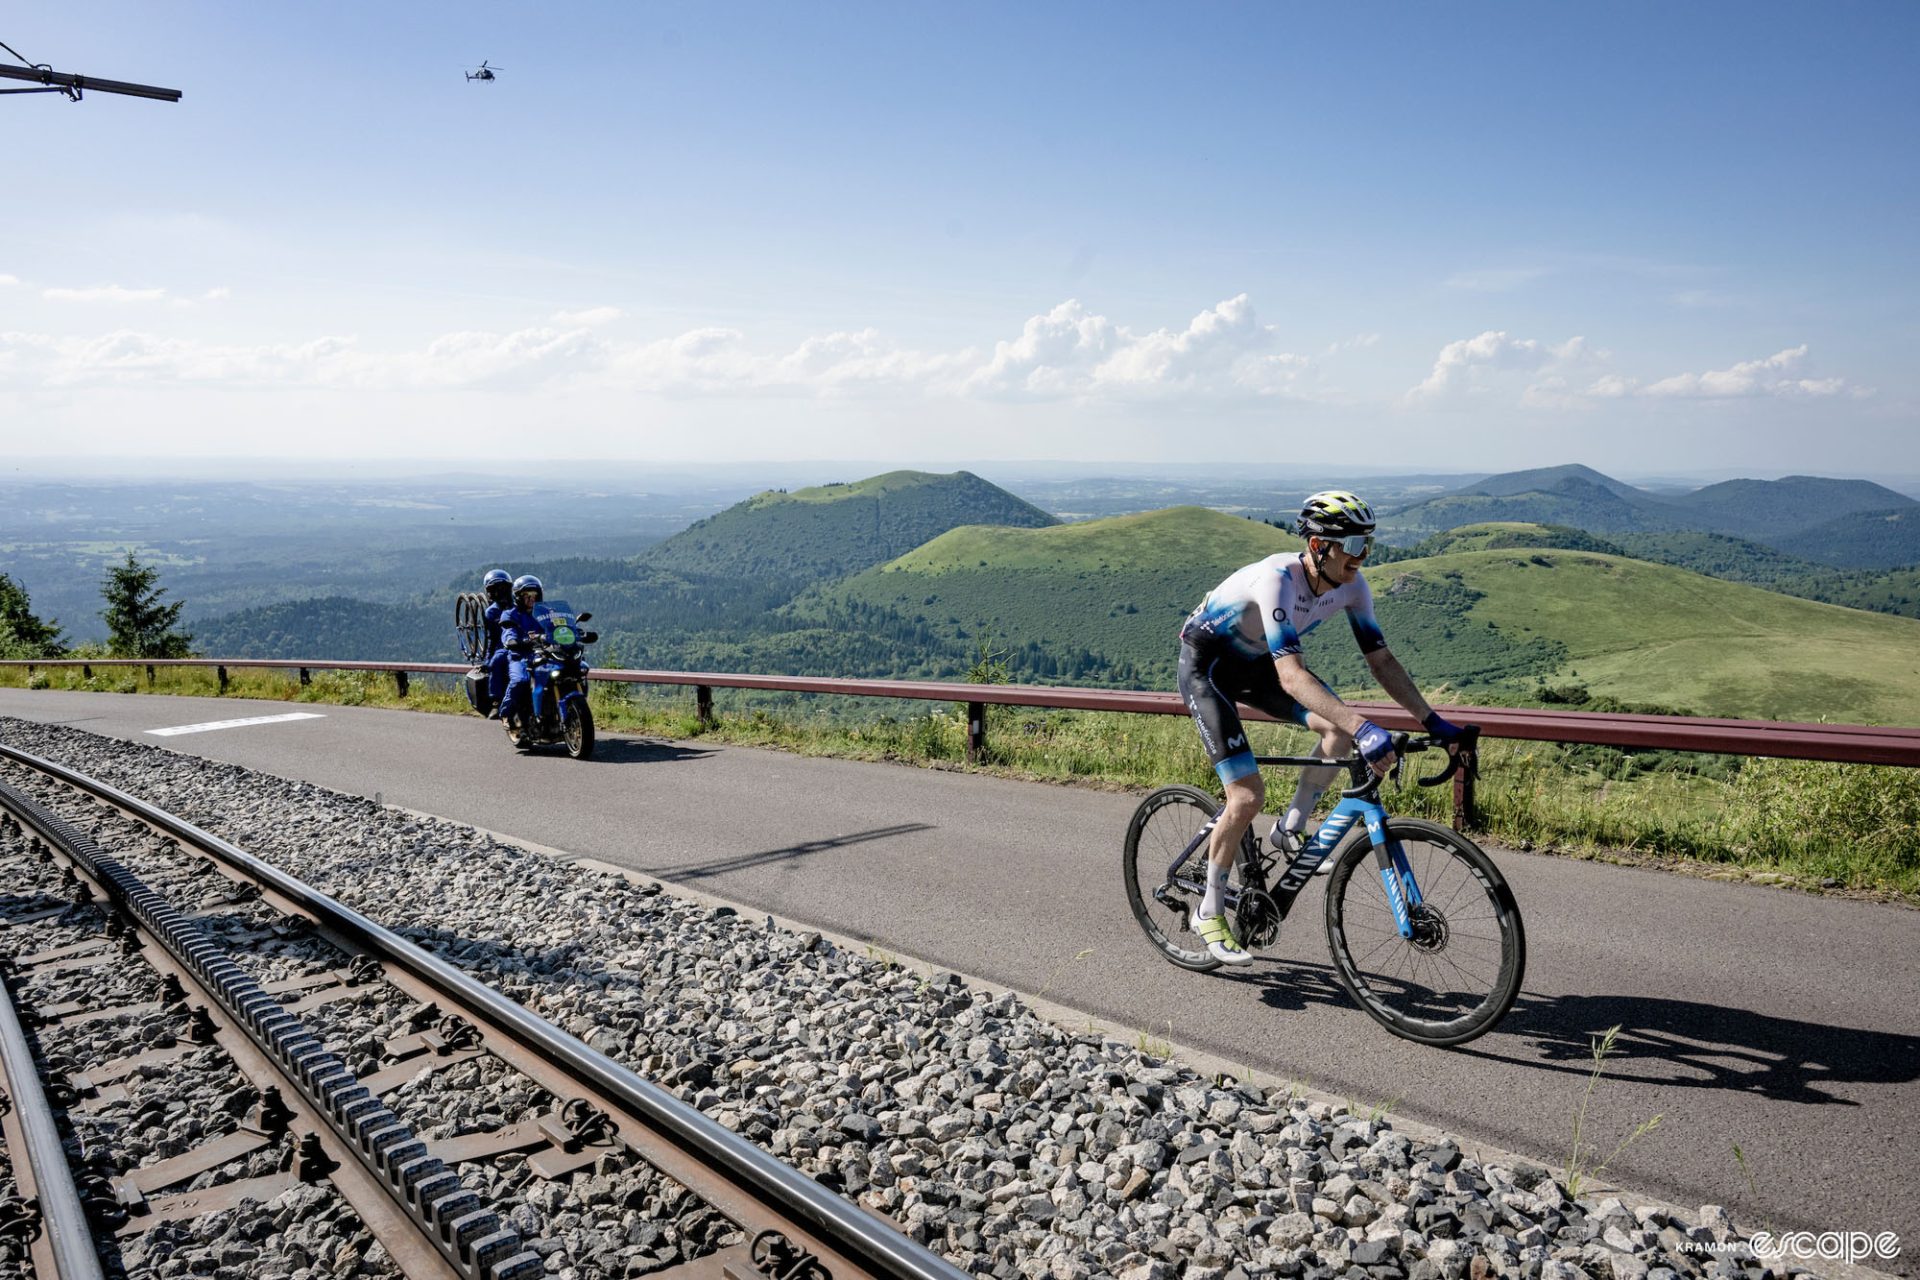 Matteo Jorgenson climbs the Puy de Dome in the solo breakaway at the 2024 Tour de France. Because the climb was closed to fans, he's all alone, with just a follow motorbike with spare wheels. Above and behind him, a helicopter looms, and he rides alongside the cog railway, a reminder of how steep the climb is.